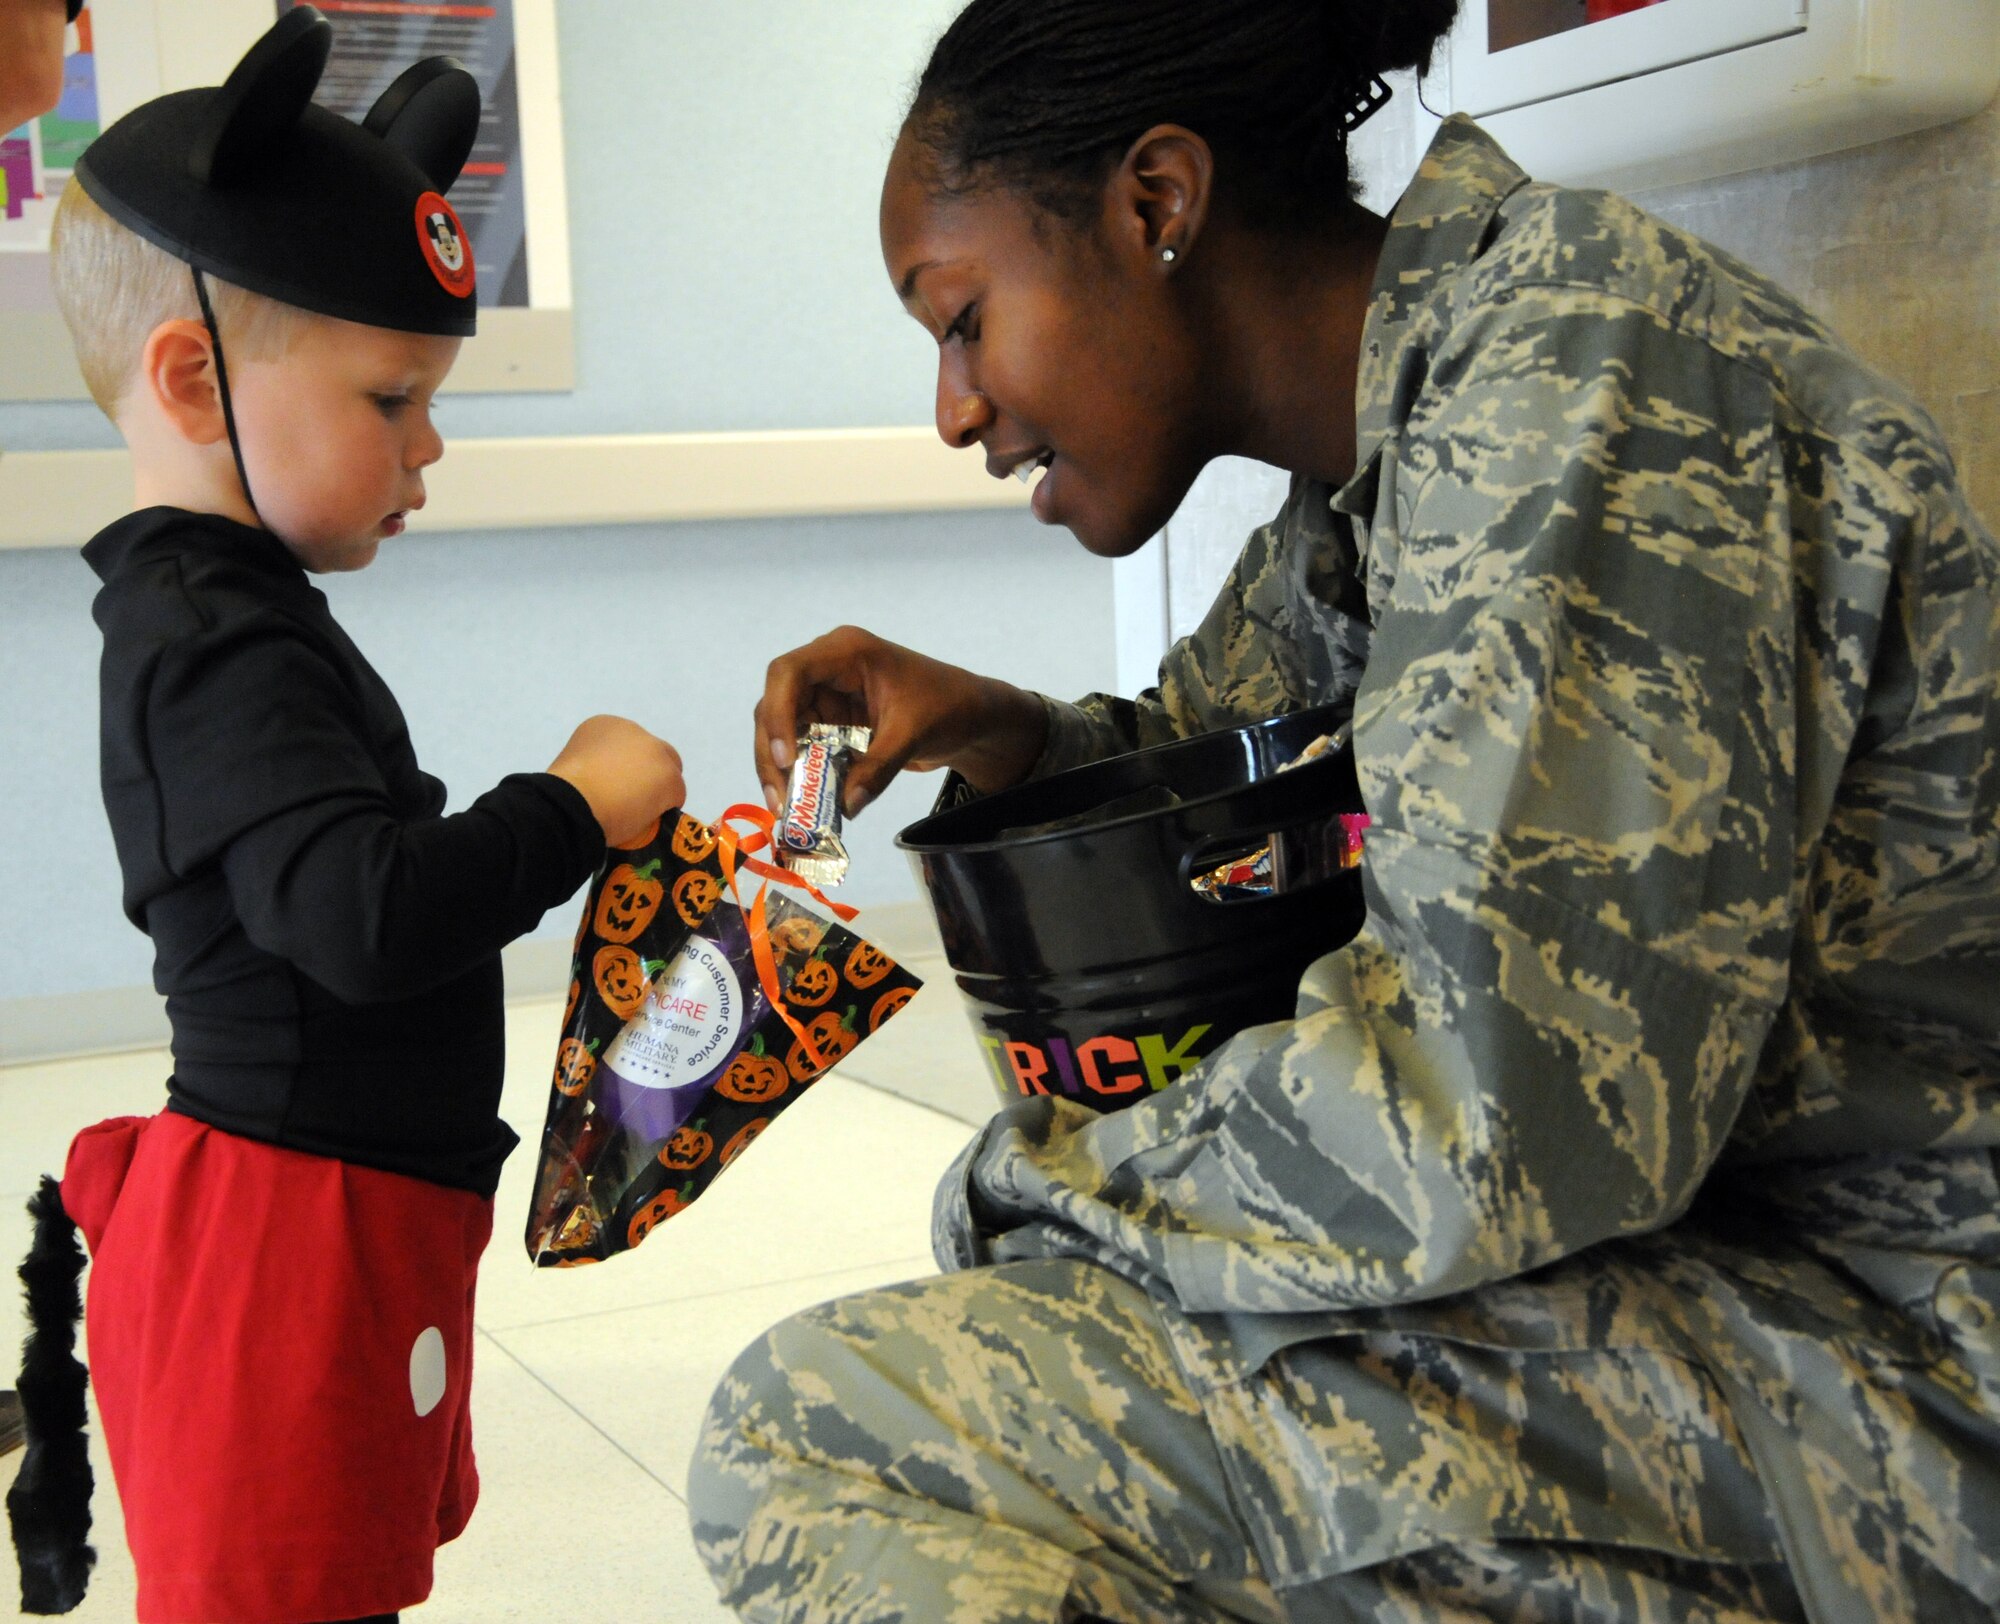 LAUGHLIN AIR FORCE BASE, TEXAS — A Laughlin child receives candy from an Airman in the 47th Medical Group building. The Family Child Care Center put on the event to give children an opportunity to show off their costumes and receive candy early. (U.S. Air Force photo/2nd Lt. James Ramirez)